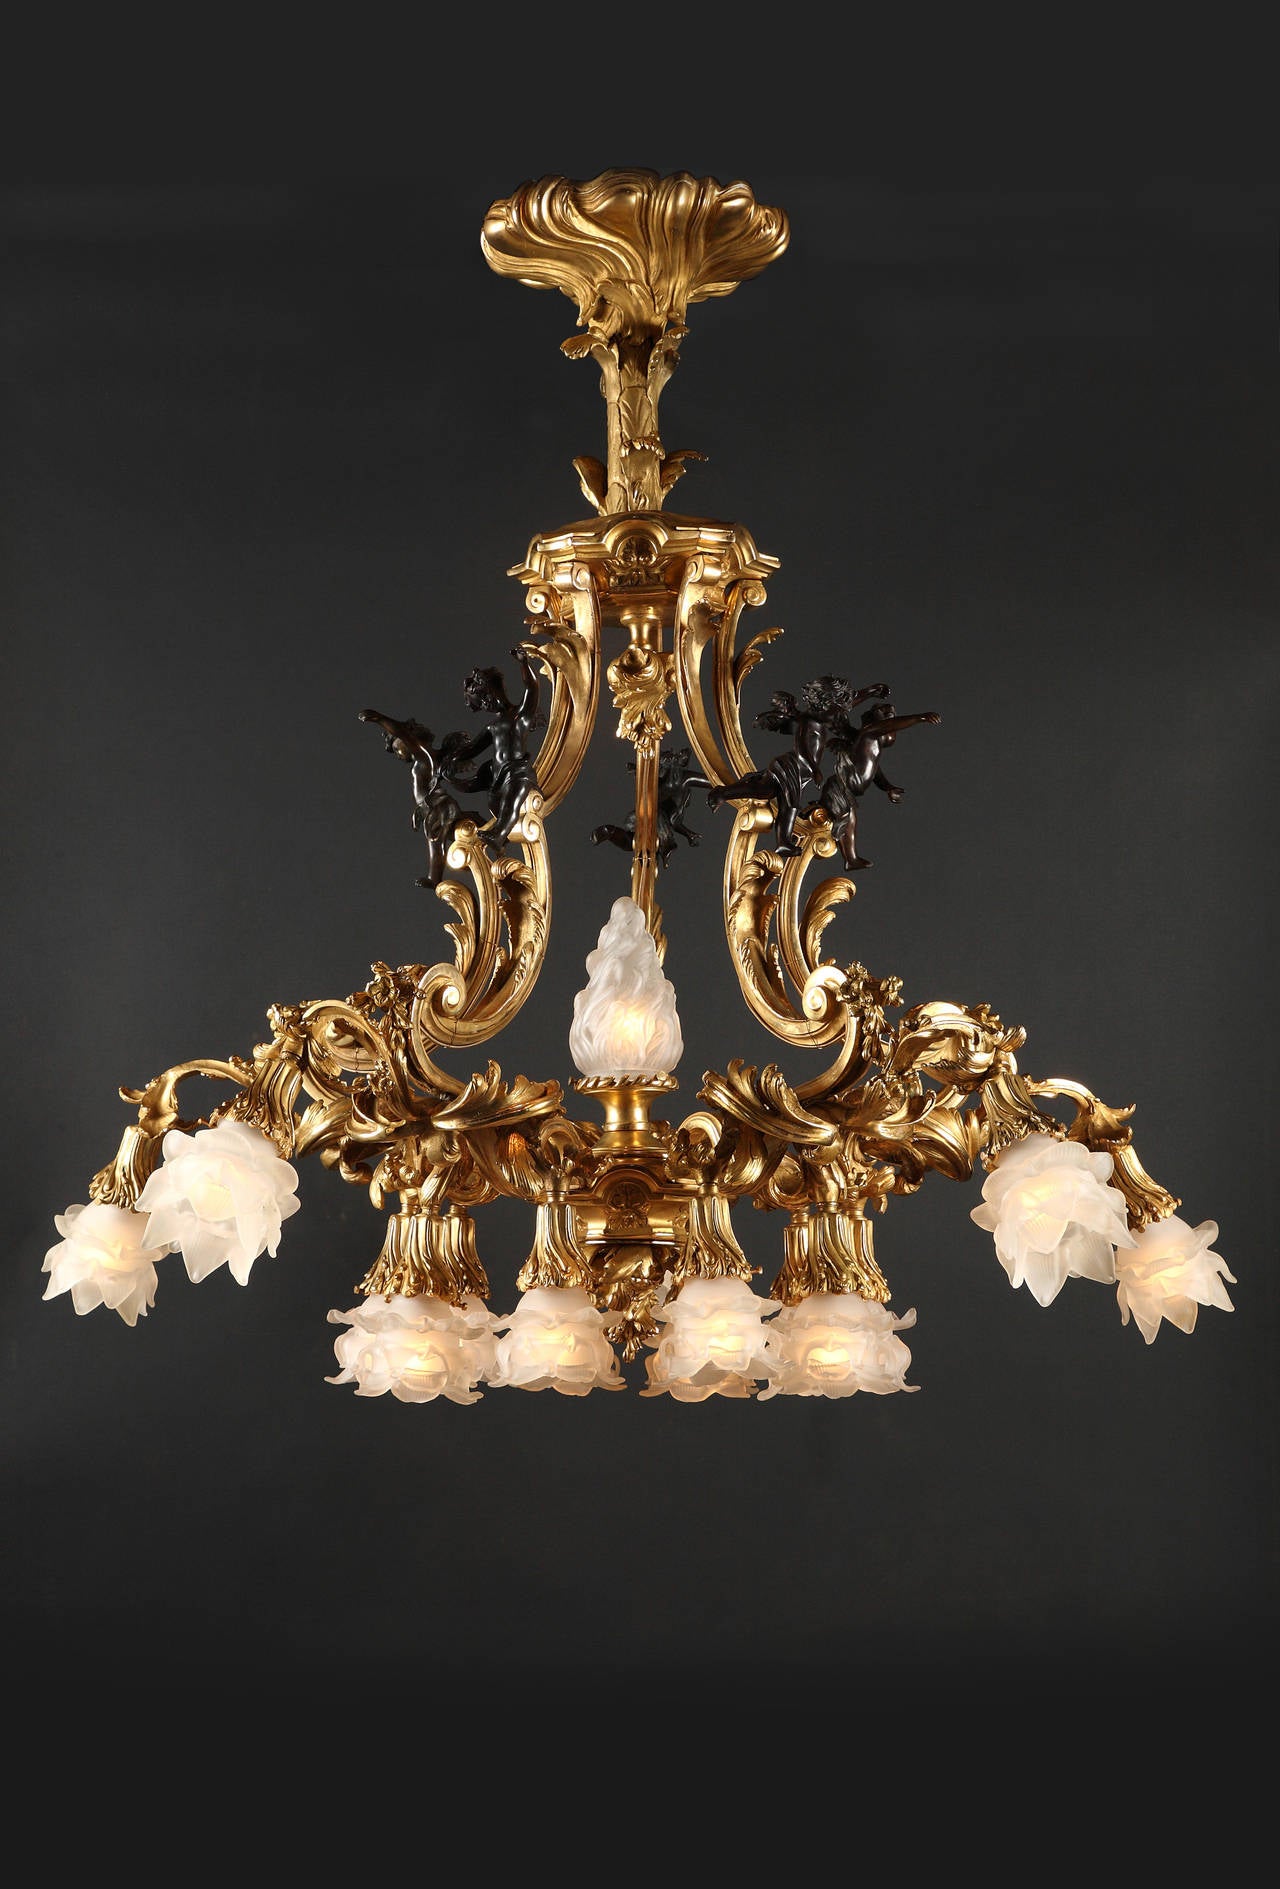 A sumptuous pair of 16 lights gilded bronze chandeliers, ornamented with Louis XV style motifs, such the five patinated putti under an architectural structure, surmounting the foliated scrolled light arms and their flower shaped frosted glass lamp